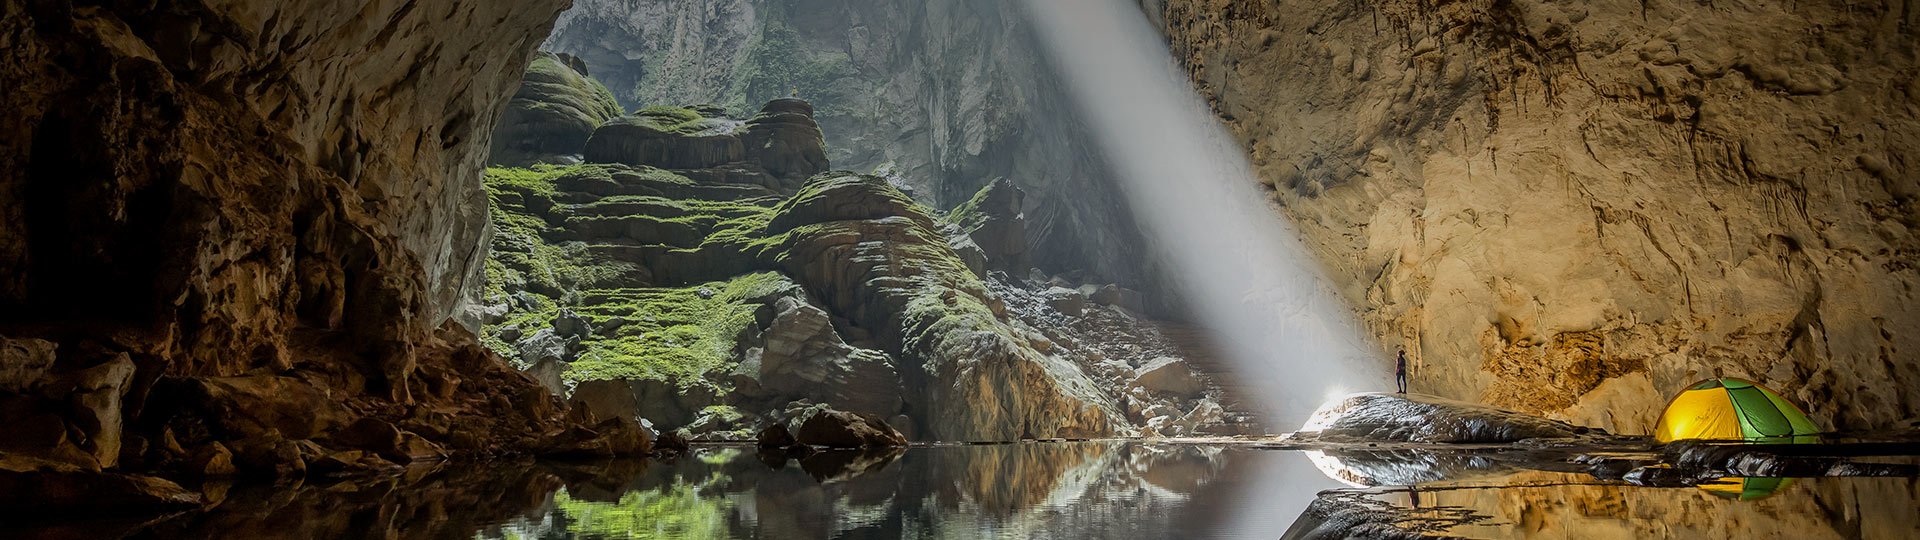 Son Doong cave